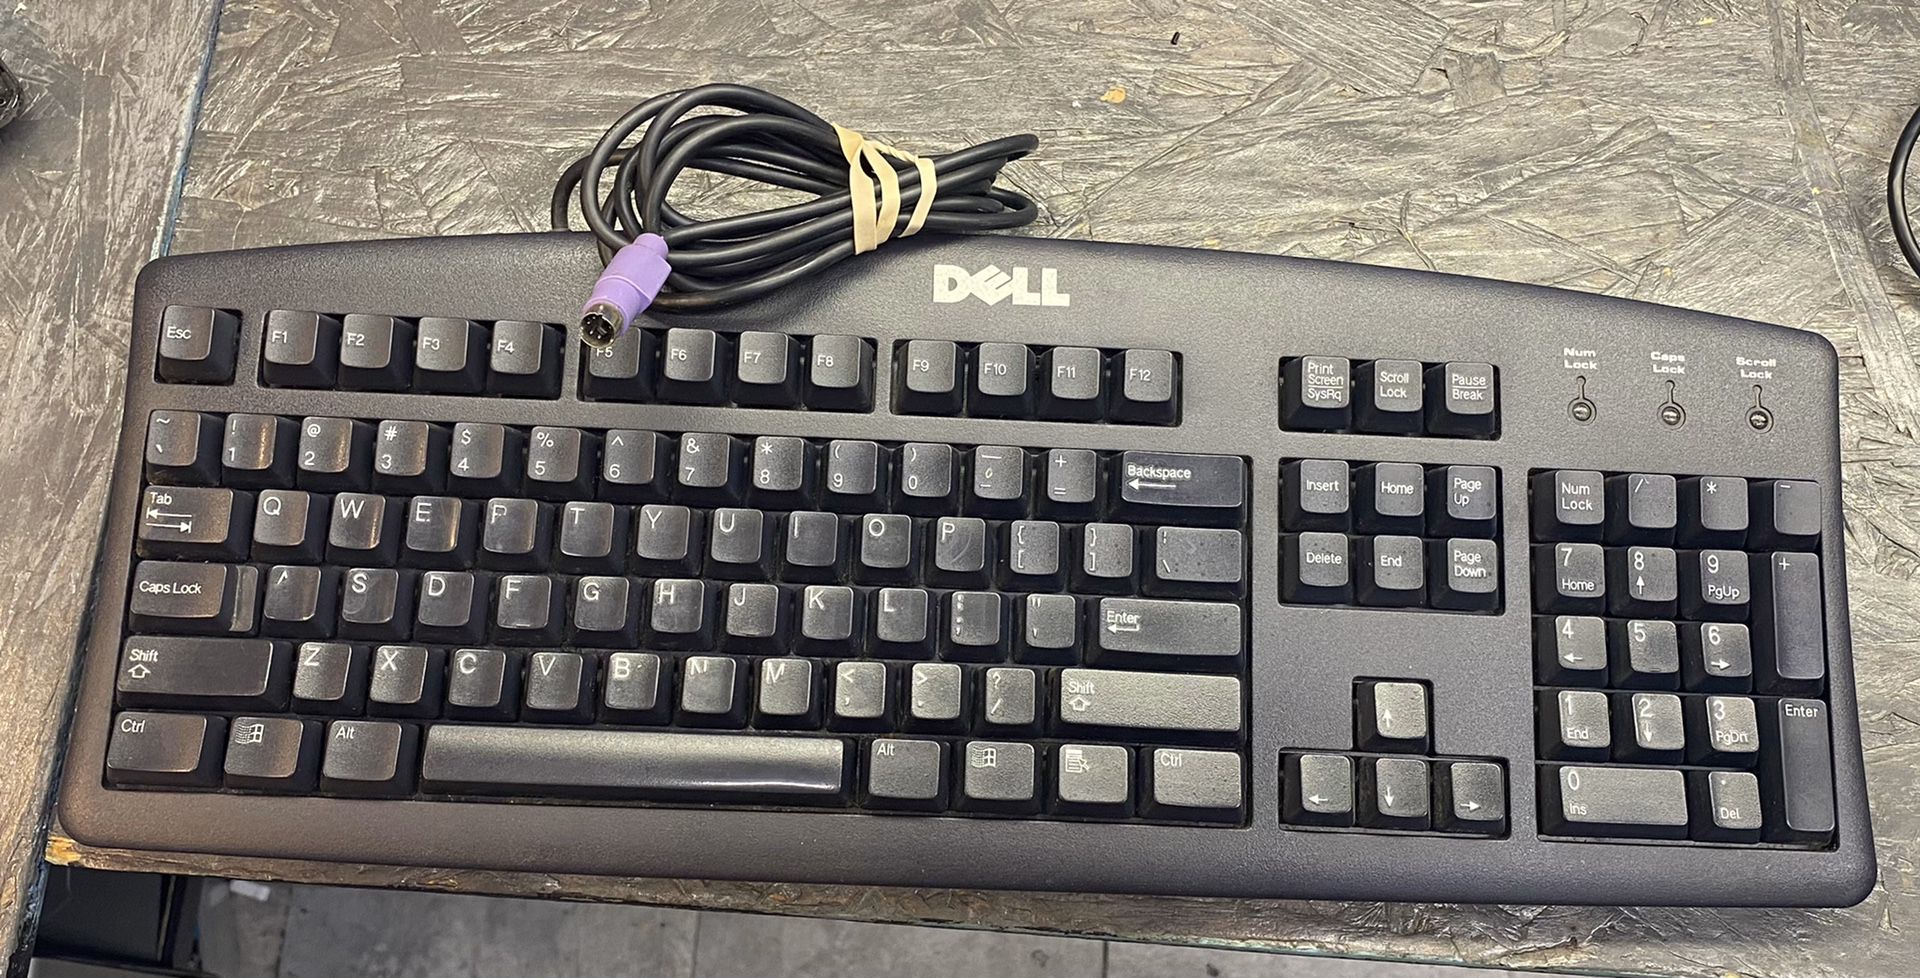 Ps2 computer keyboard (ps2 connector) USB AVAILABLE